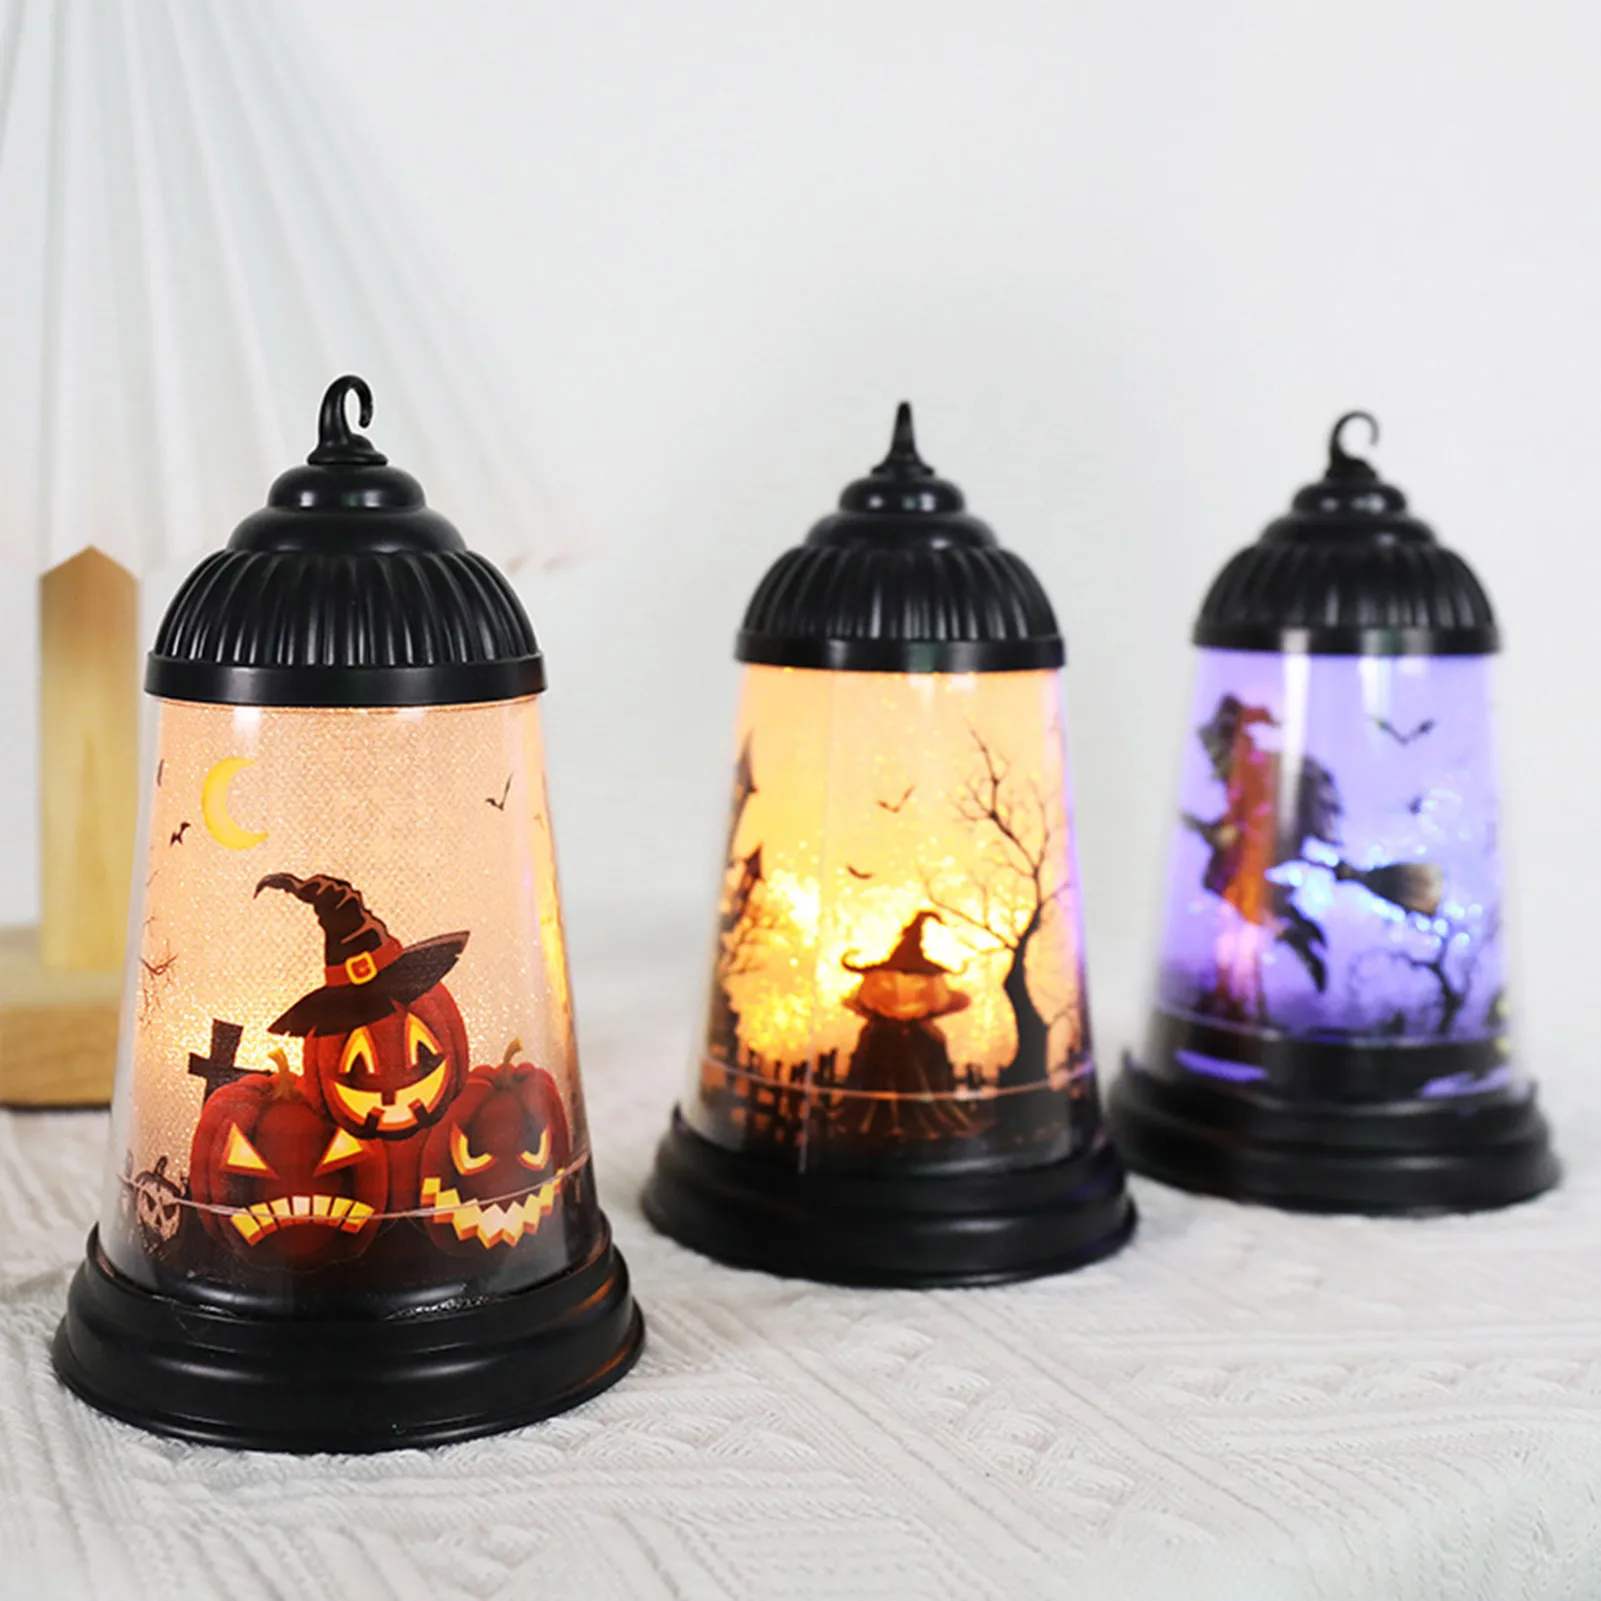 Halloween Lantern LED Lights Vintage Witch Pumpkin Cat Decorative Candle Lamp For Home Pathway Patio Halloween Party Supplies